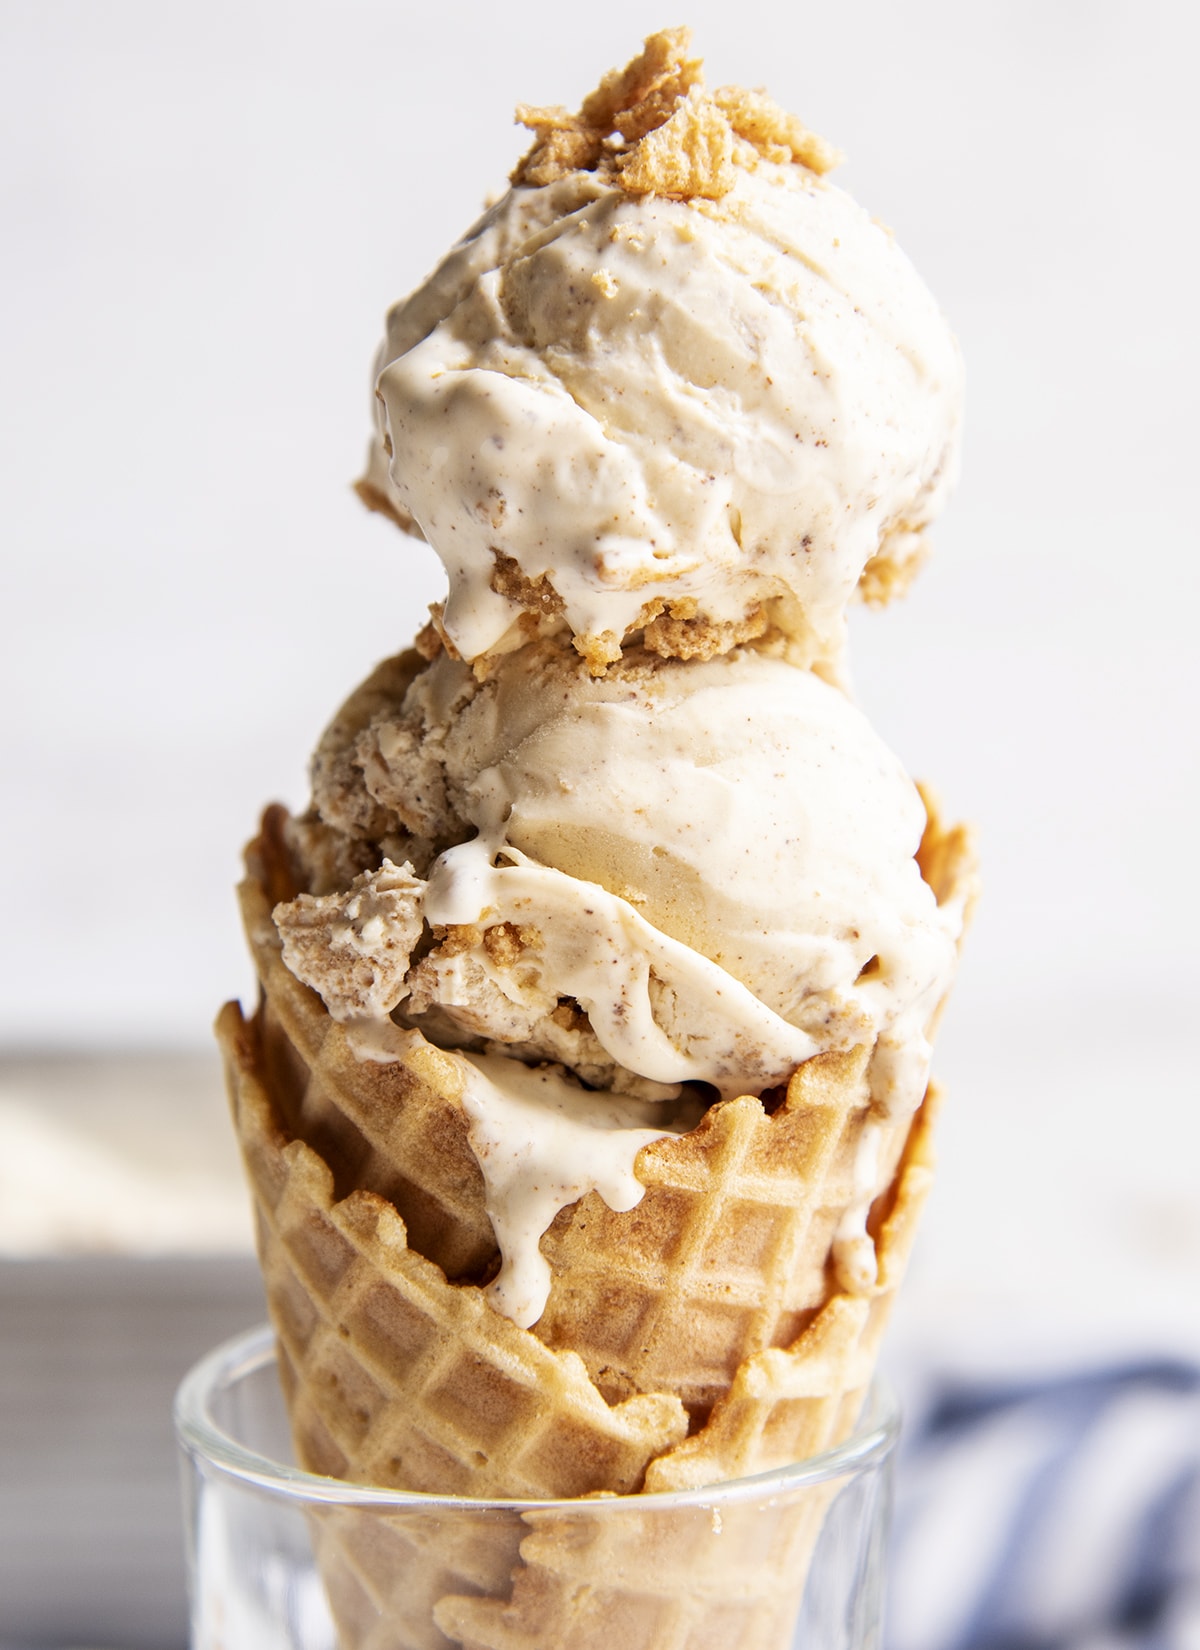 An waffle ice cream cone full of two scoops of Cinnamon Toast Crunch Ice Cream.